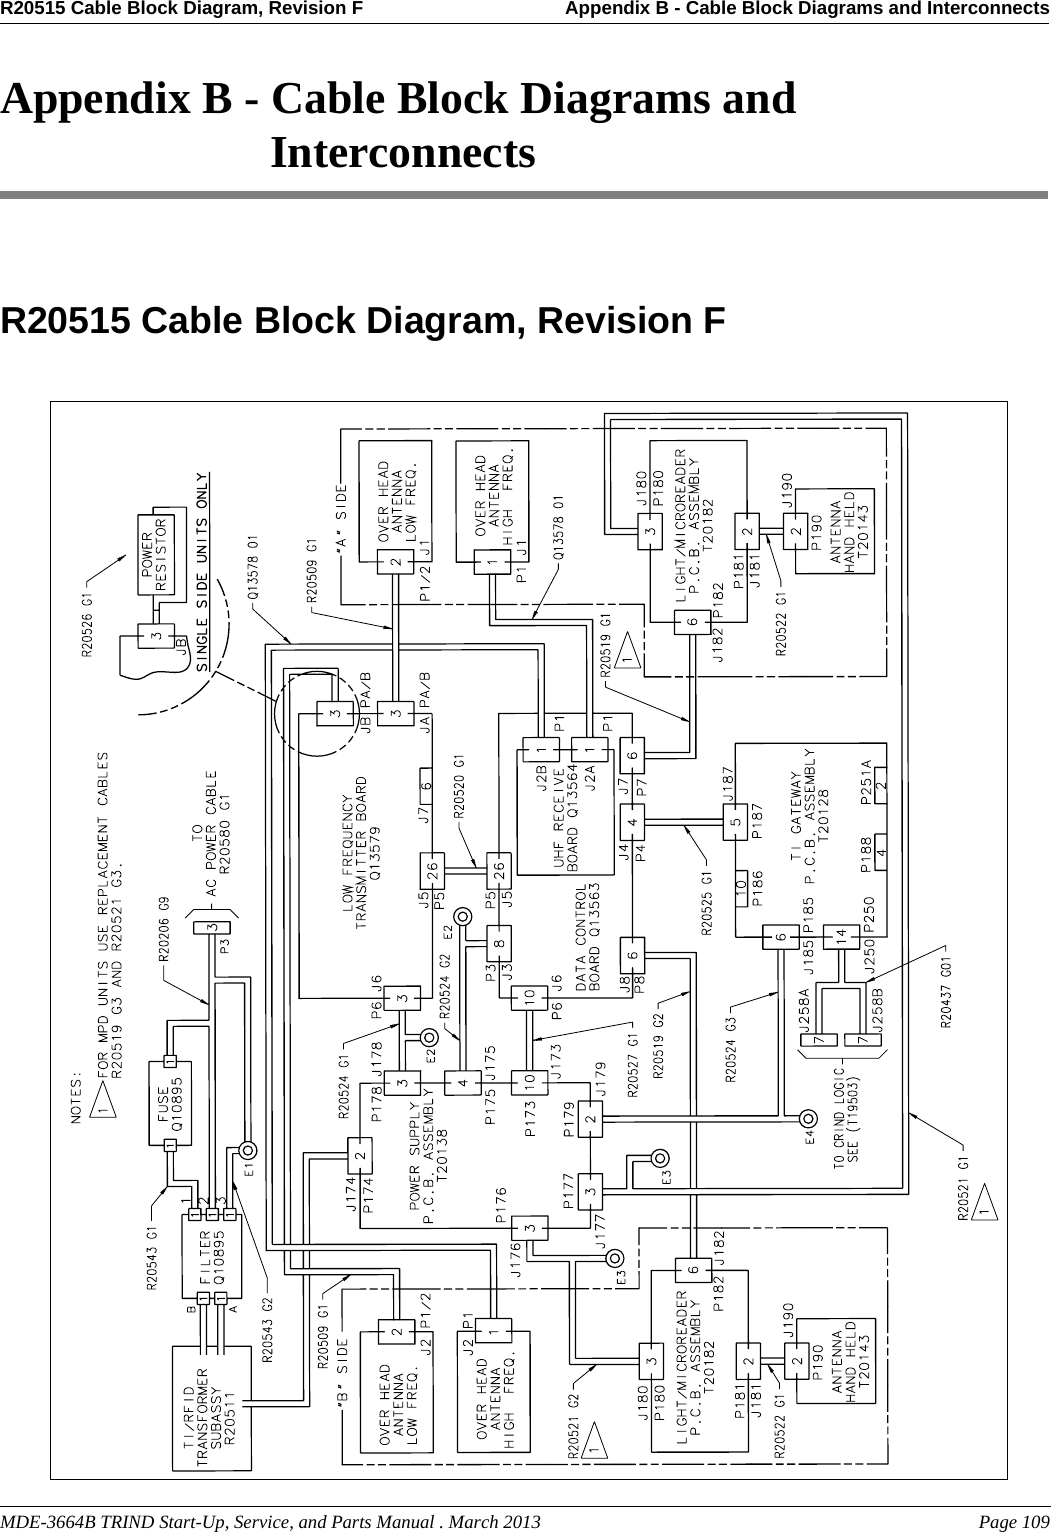 MDE-3664B TRIND Start-Up, Service, and Parts Manual . March 2013 Page 109R20515 Cable Block Diagram, Revision F Appendix B - Cable Block Diagrams and InterconnectsPreliminaryAppendix B - Cable Block Diagrams and InterconnectsR20515 Cable Block Diagram, Revision F